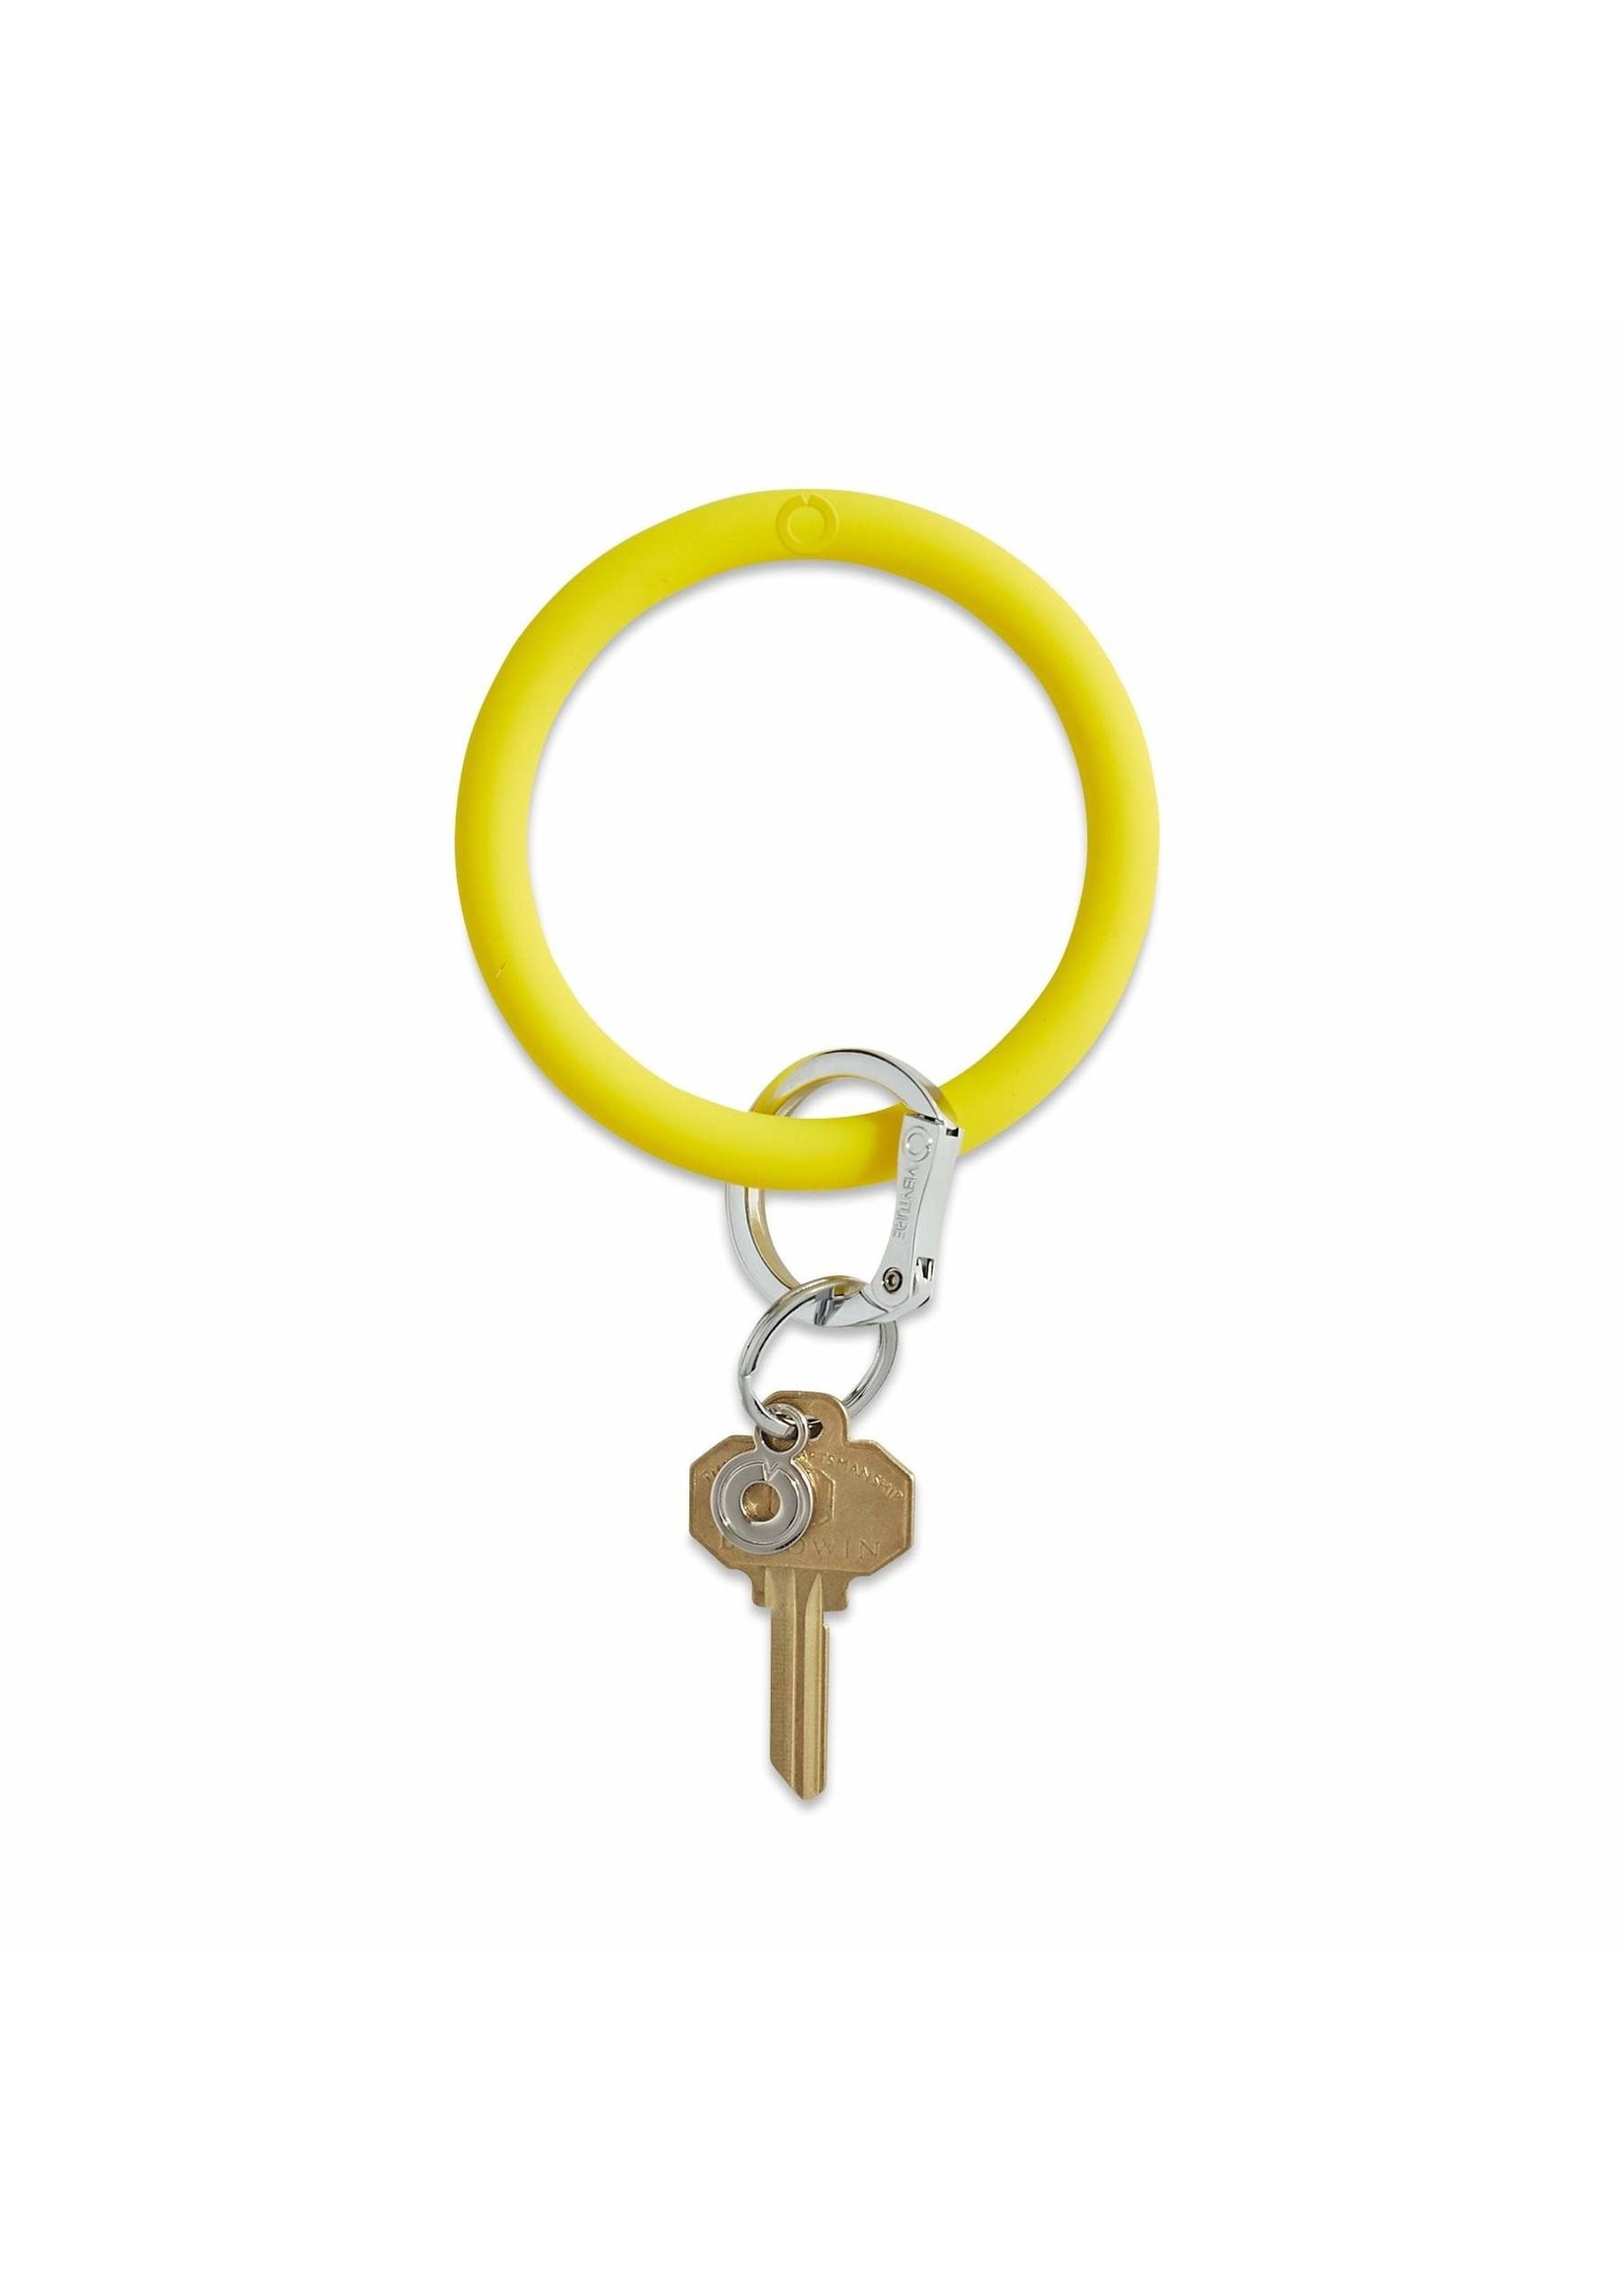 O-venture Silicone Key Ring - Yes Yellow